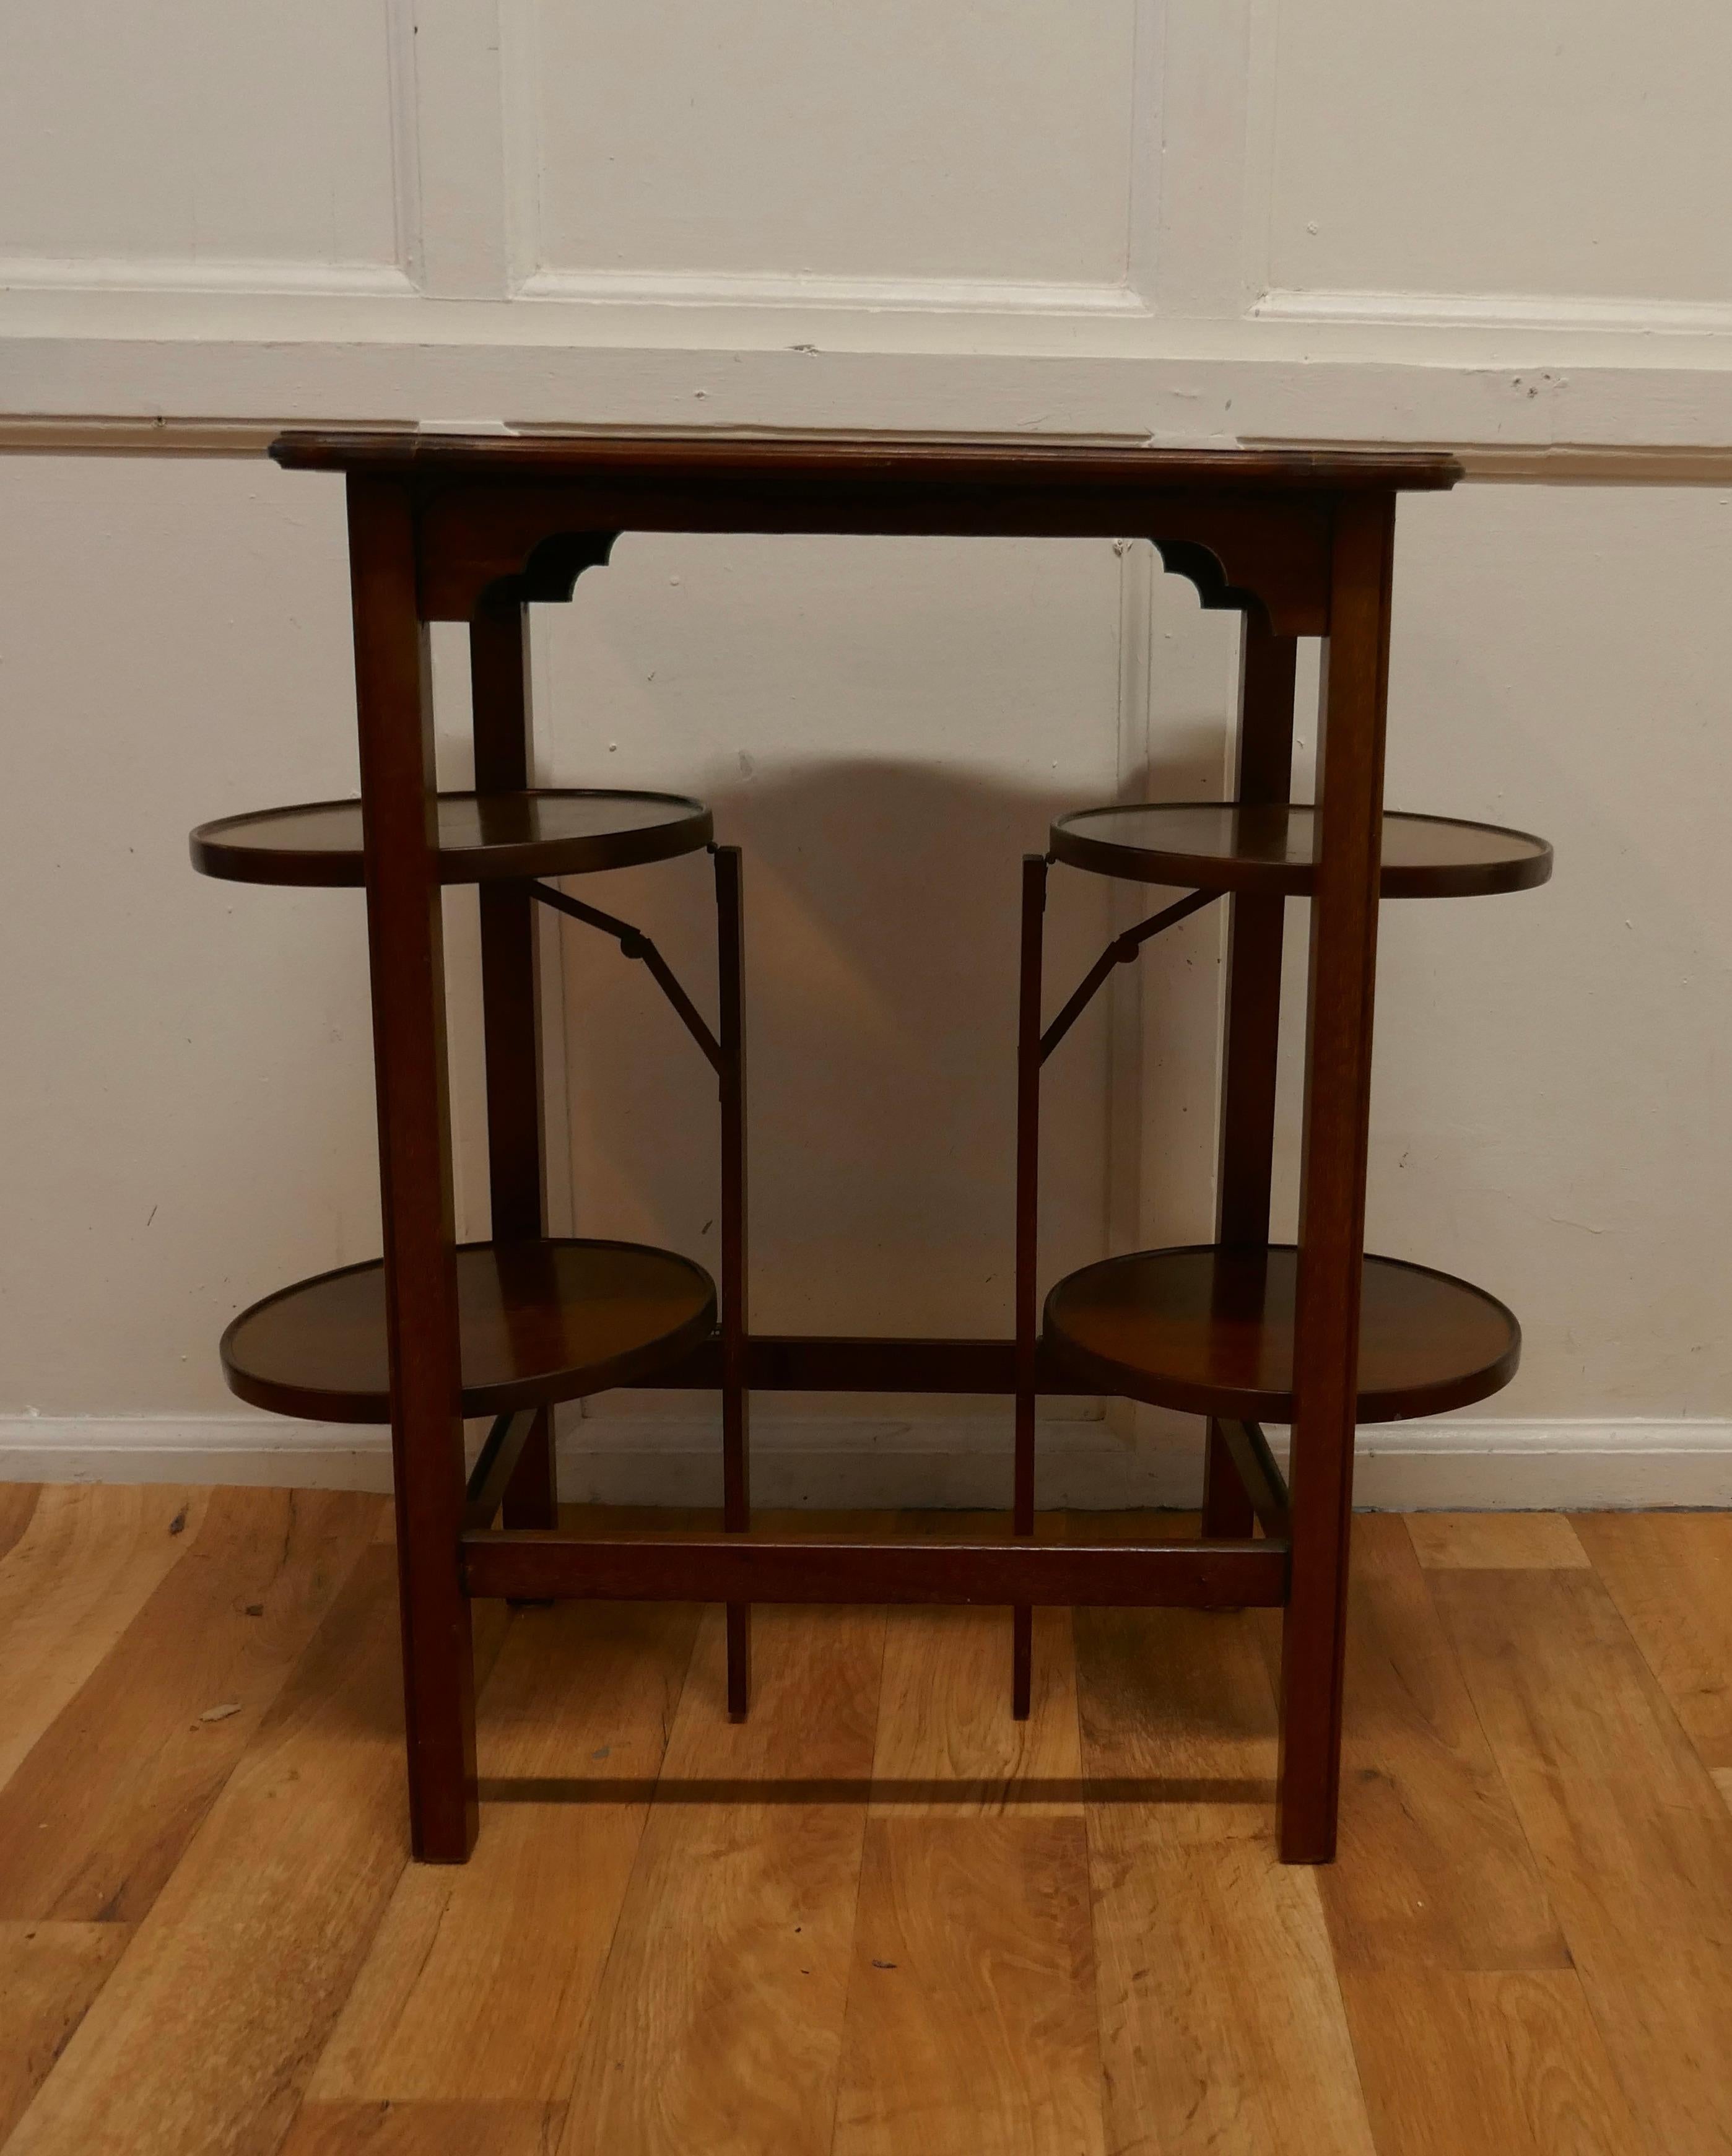 Edwardian 4 Tray Mahogany Table Cake Stand or Dumb Waiter For Sale